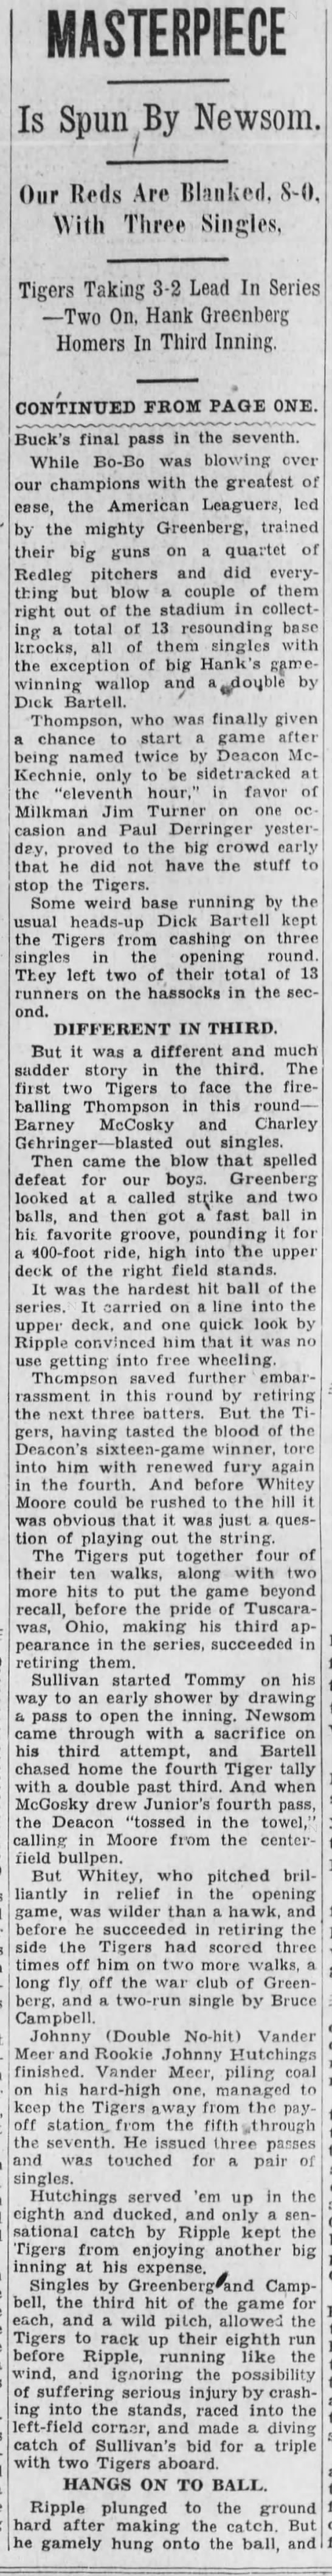 Mon 10/7/40: WS Game 5, Cincy coverage (pg 2 of 2) - 